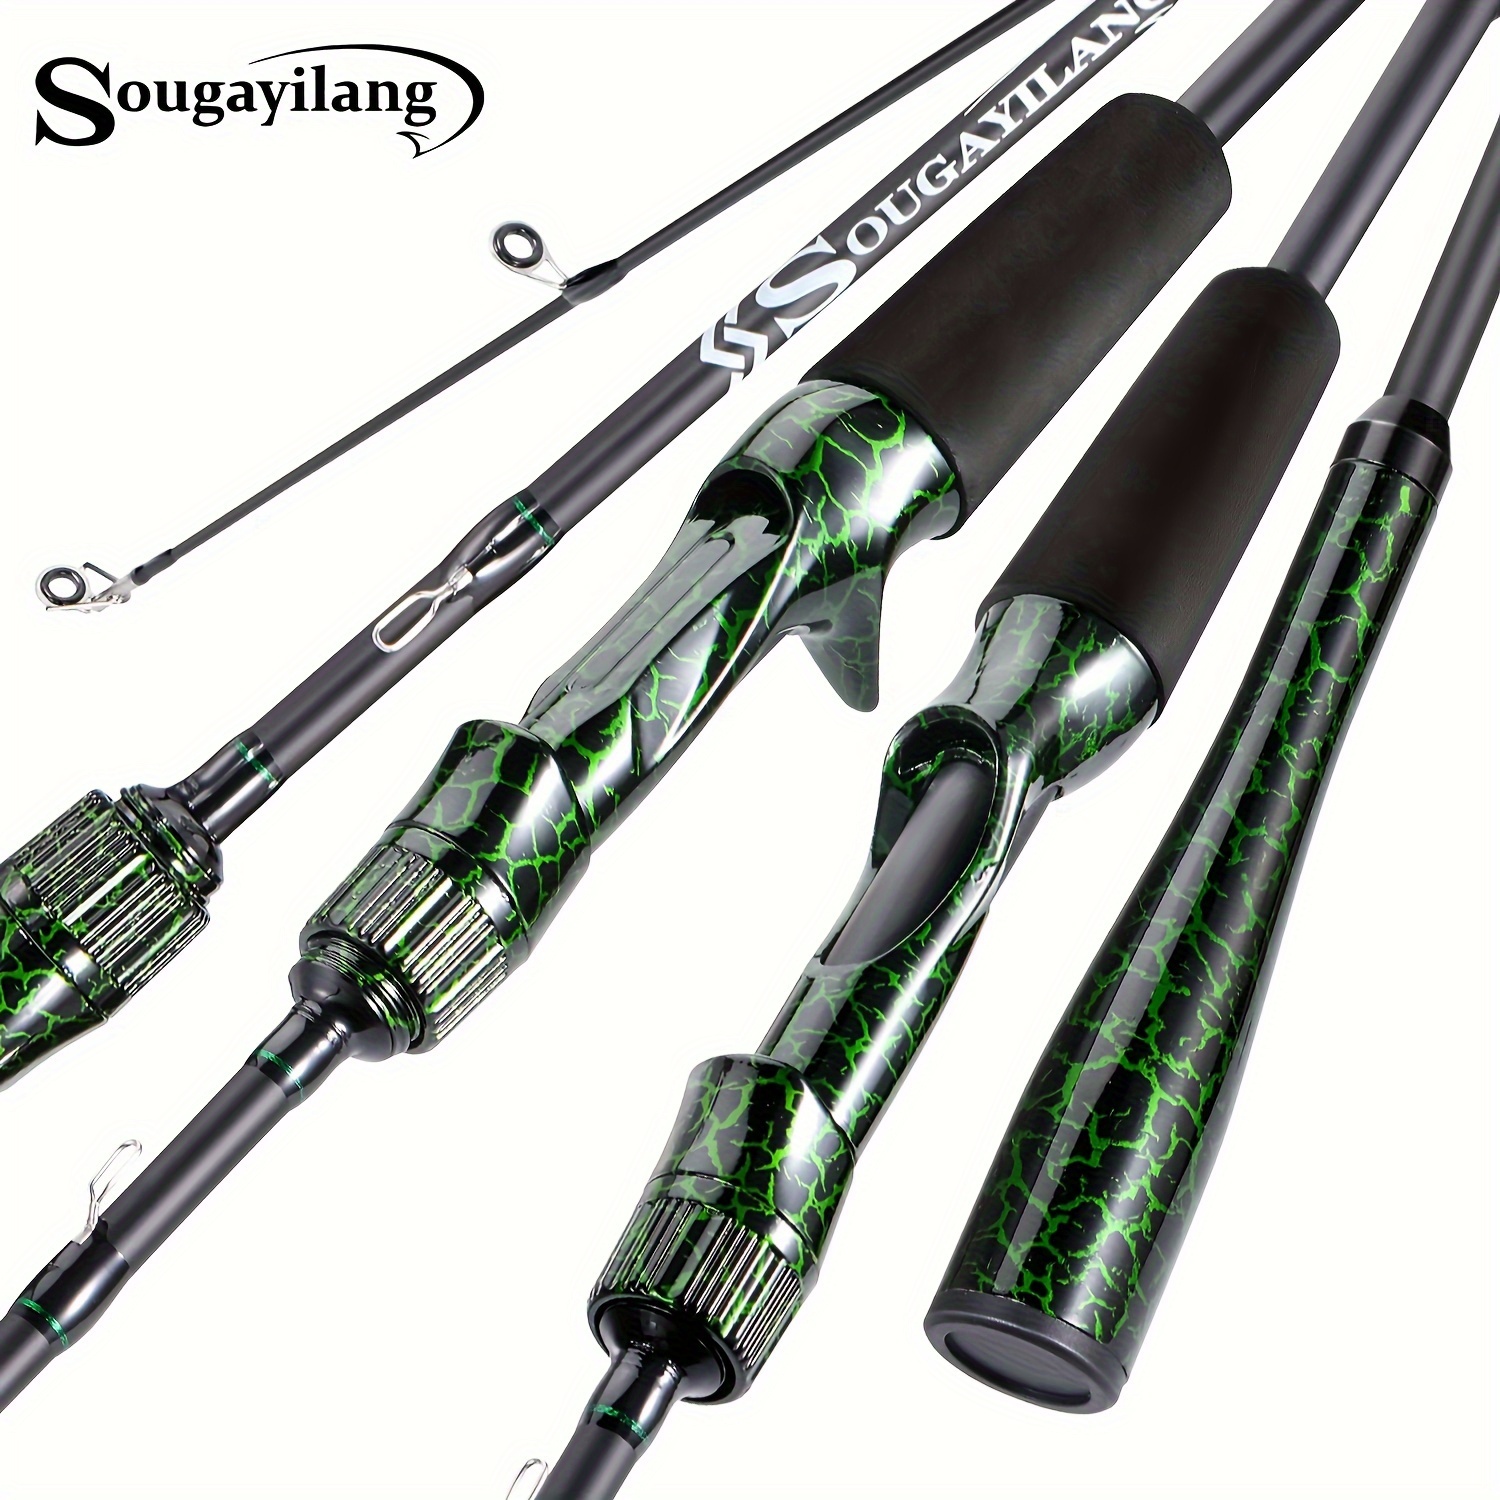 Sougayilang 2 Section CarbonFiber Fishing Rod Spinning/casting UL